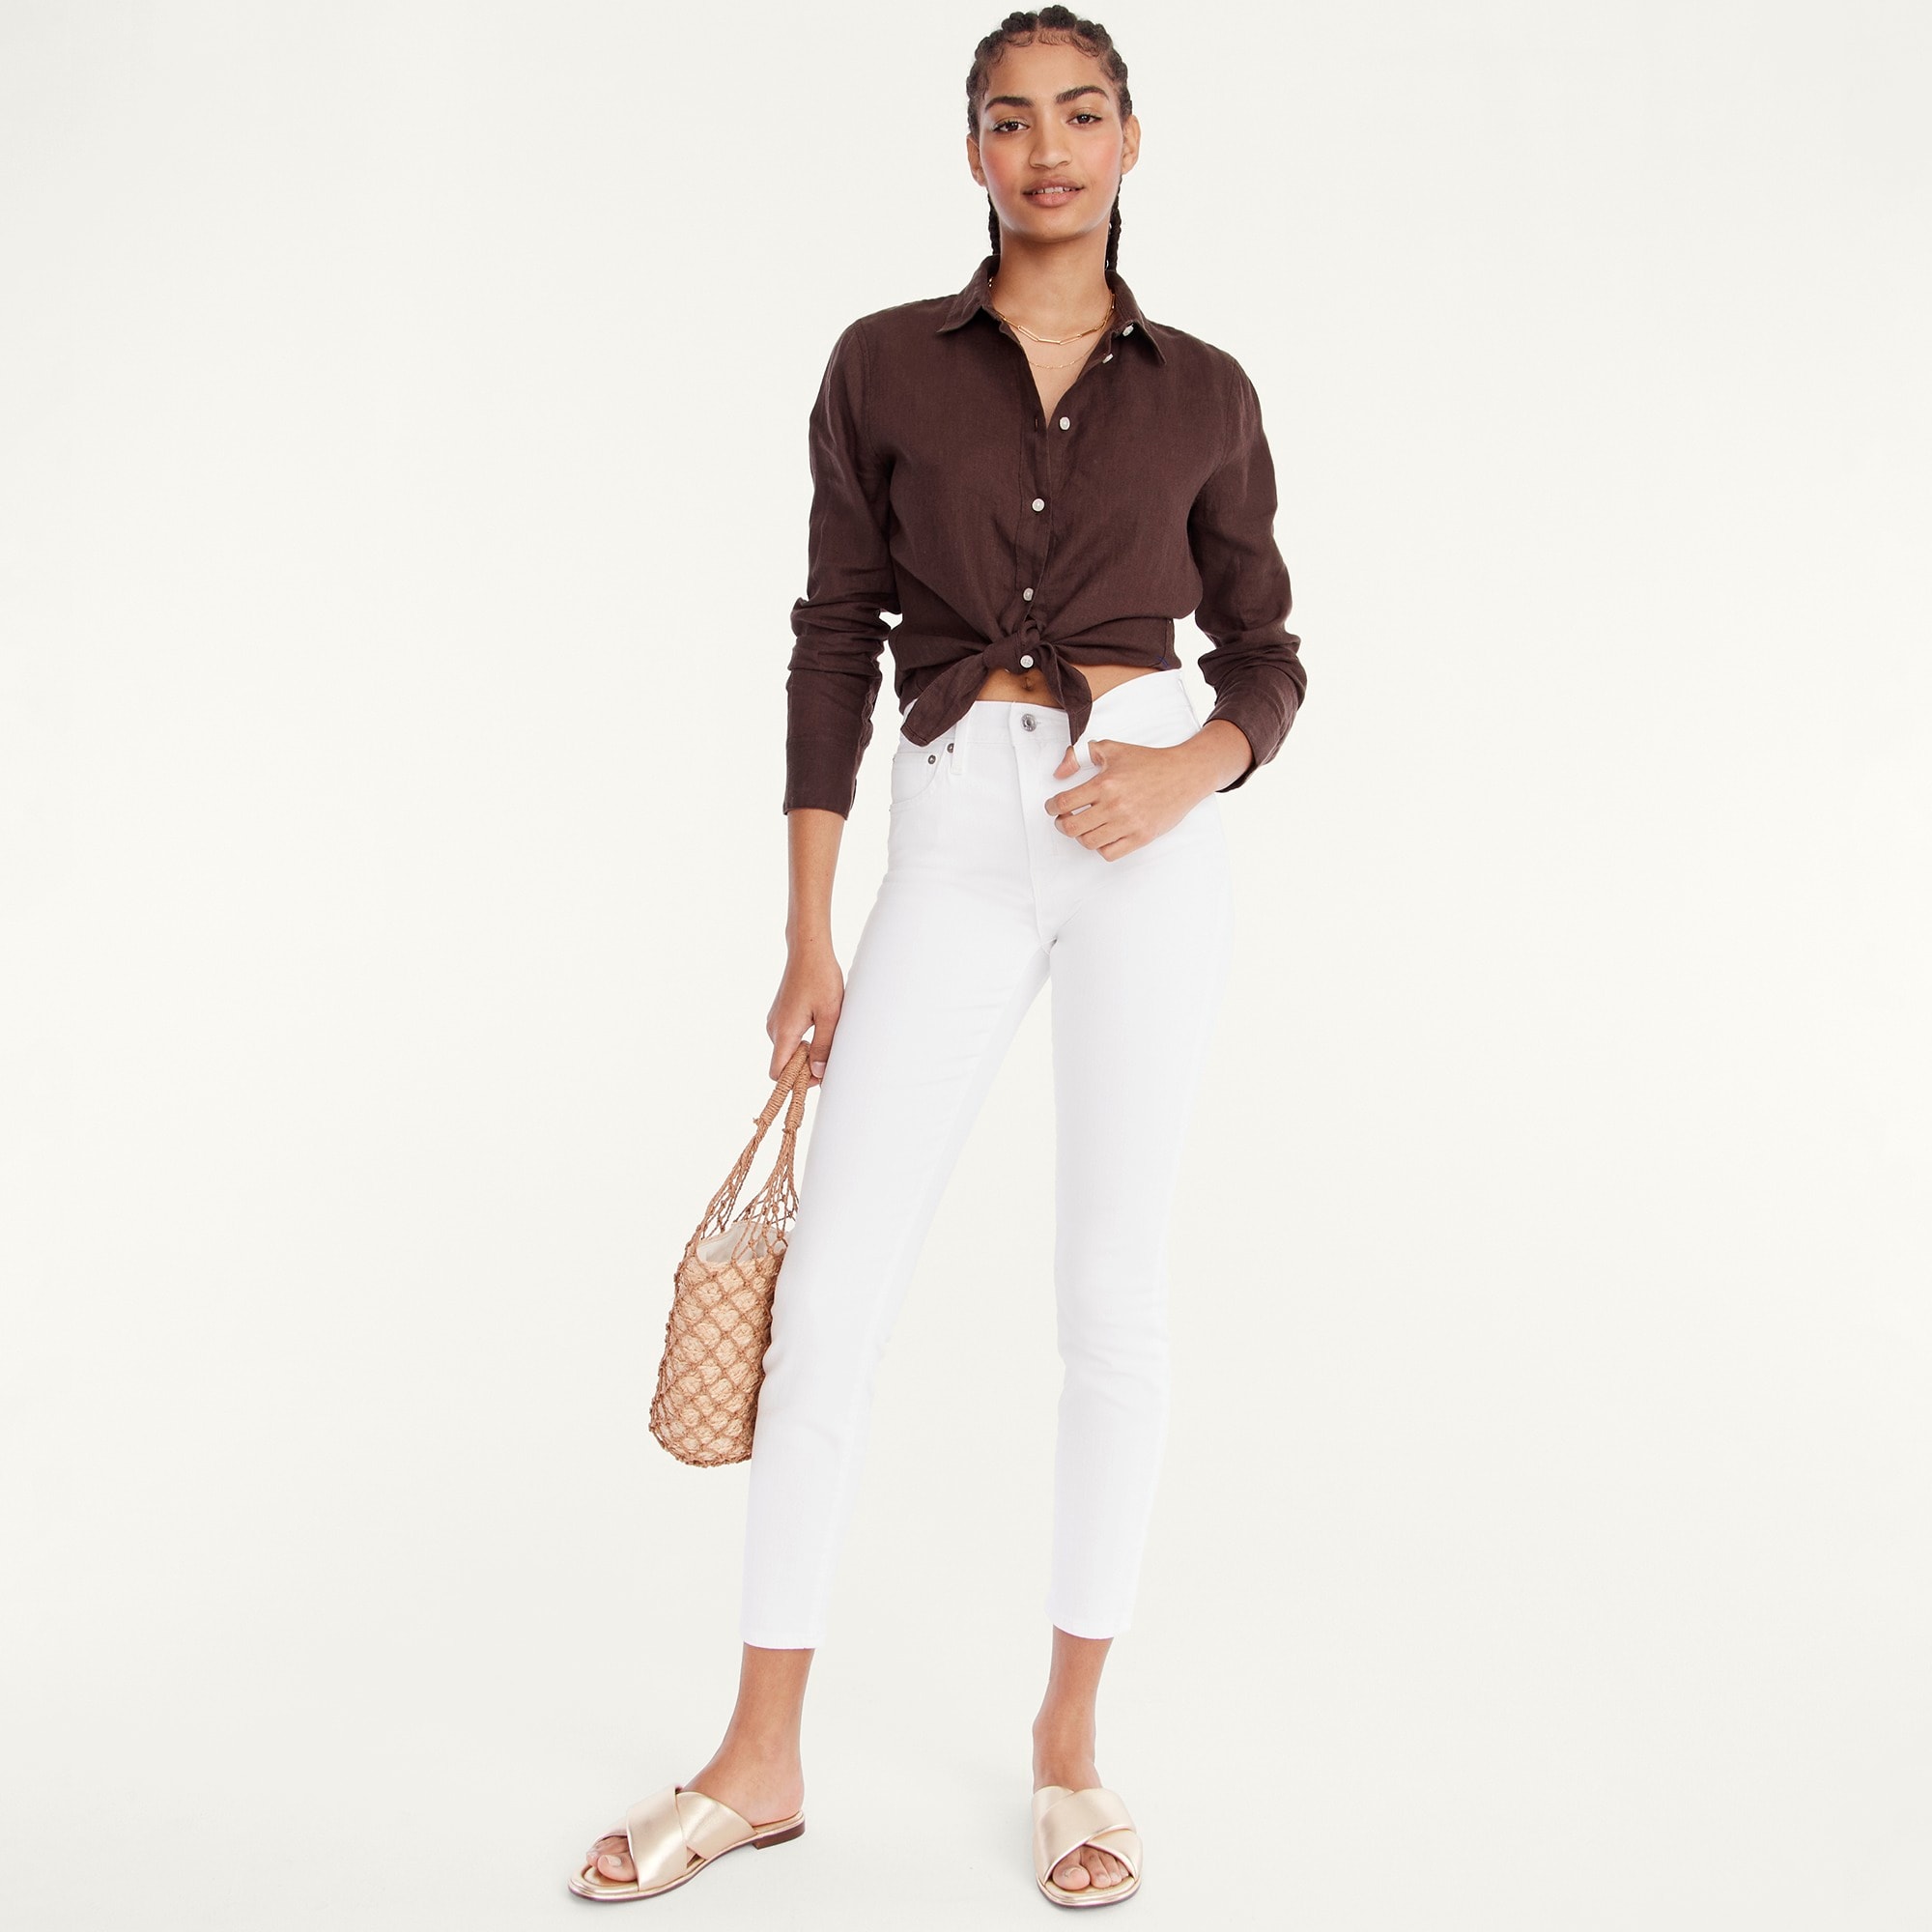 j crew lookout high rise skinny jeans